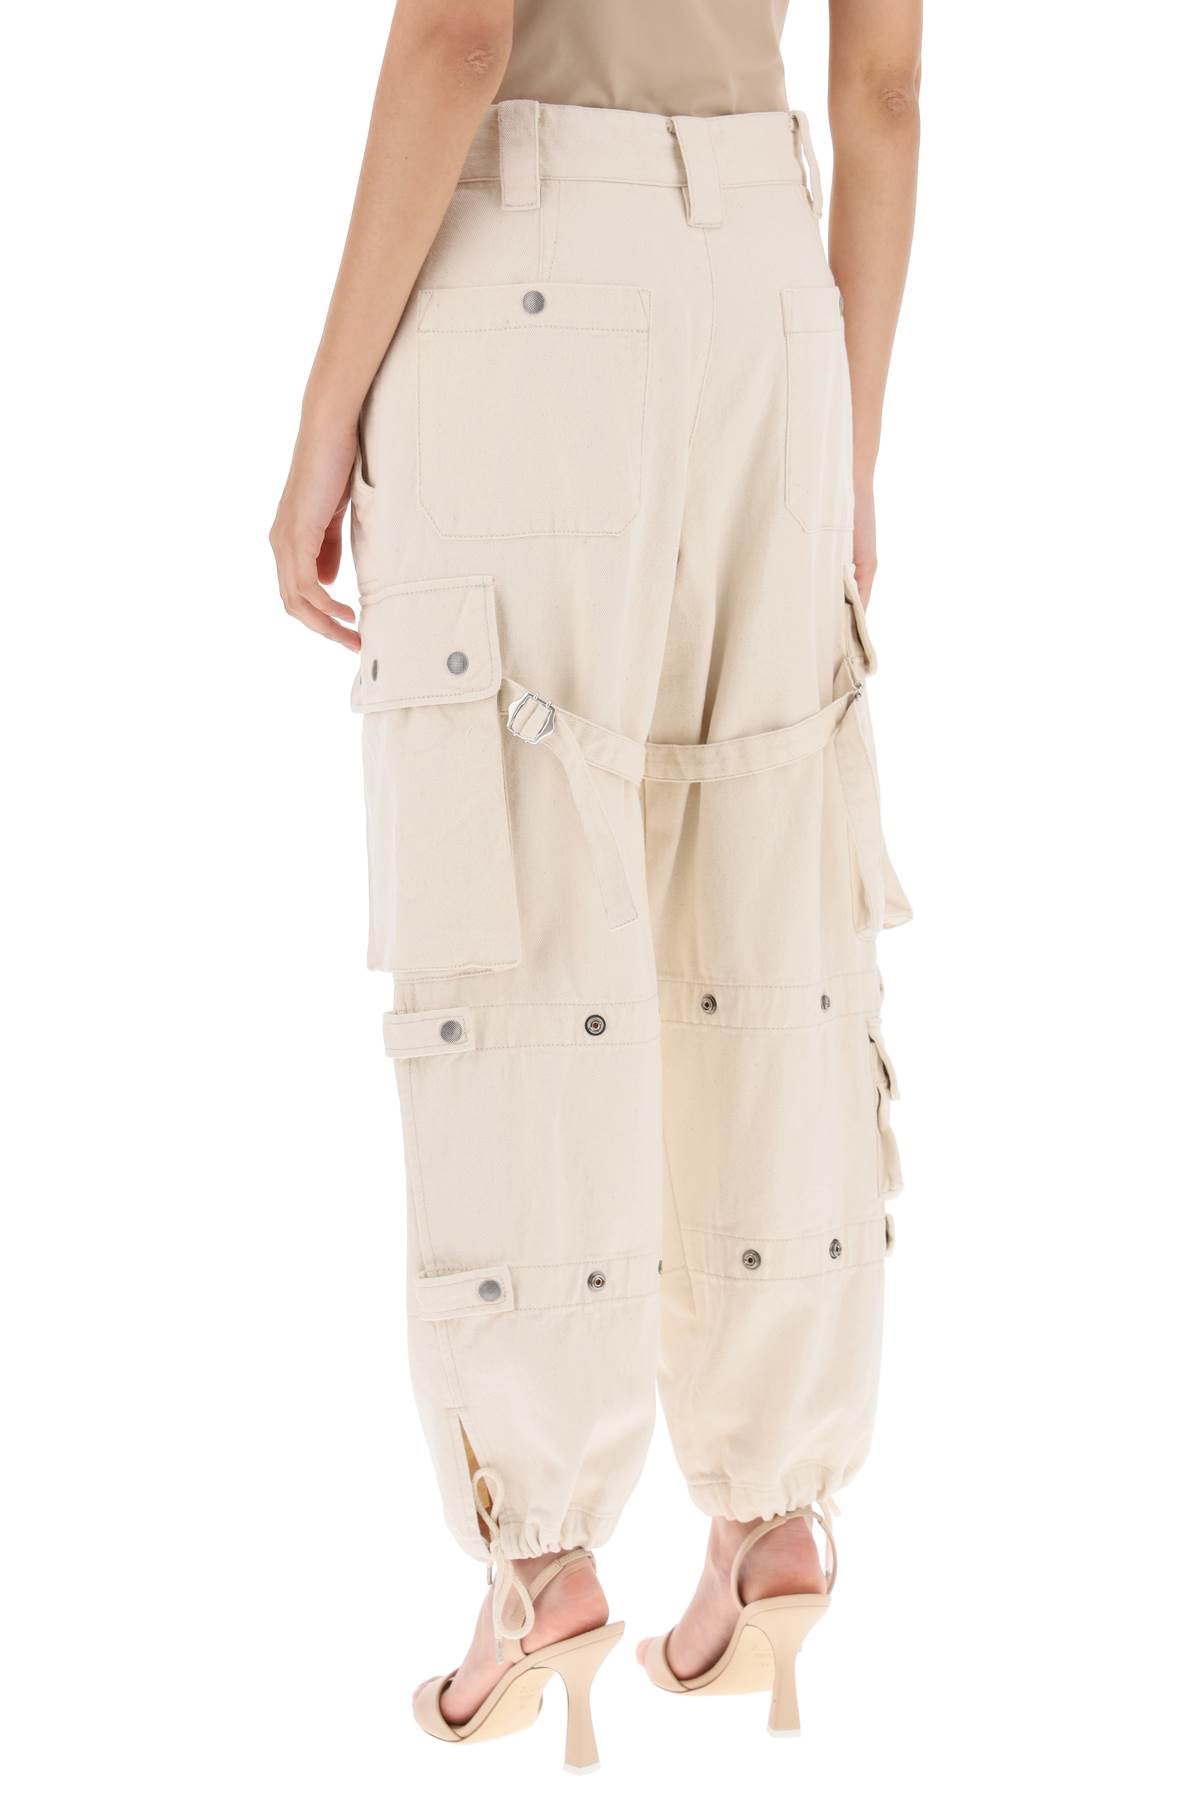 Isabel marant 'elore' cargo pants in cotton